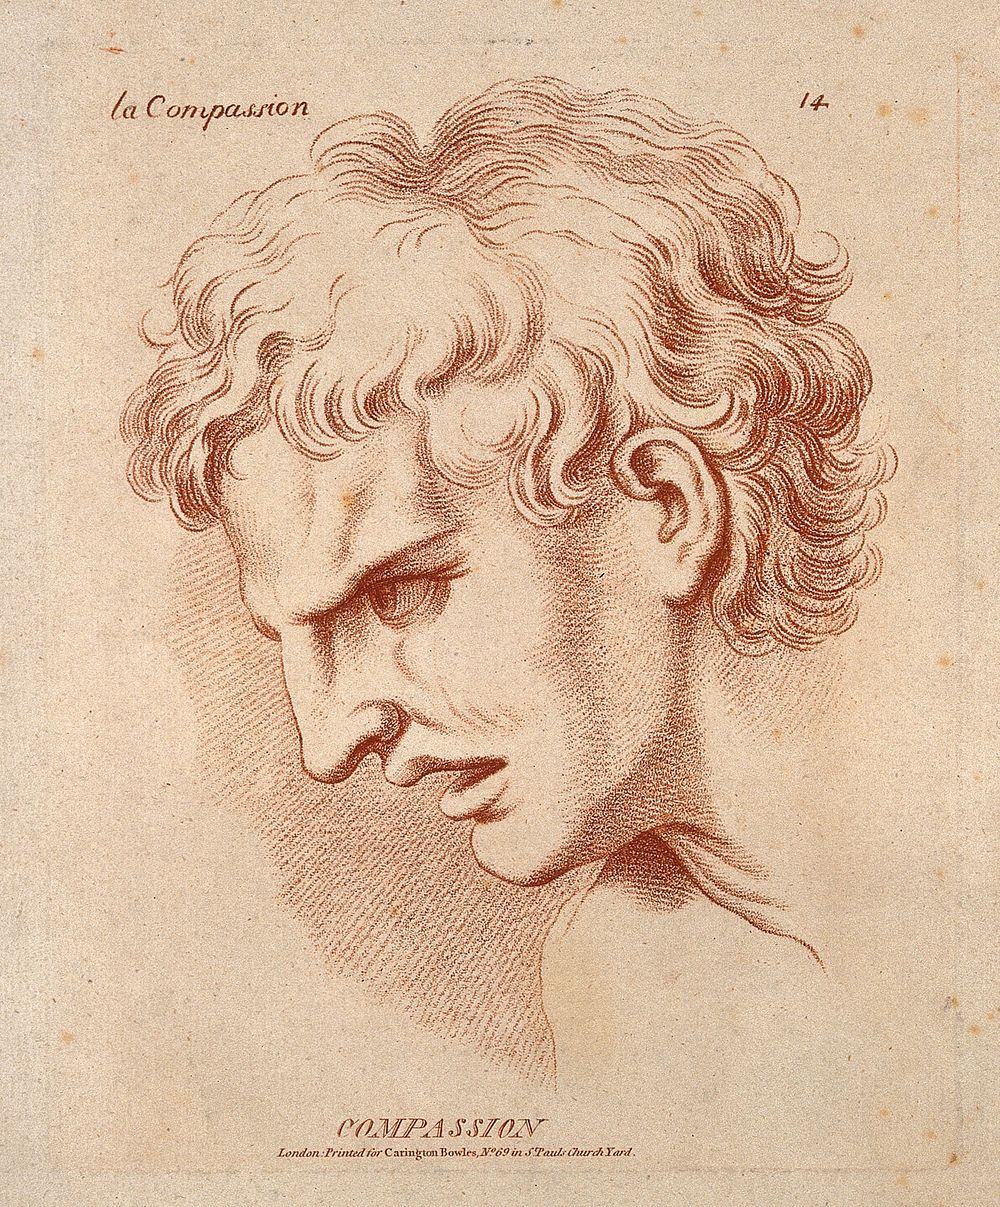 A man whose profile expresses compassion. Crayon manner print by W. Hebert, c. 1770, after C. Le Brun.